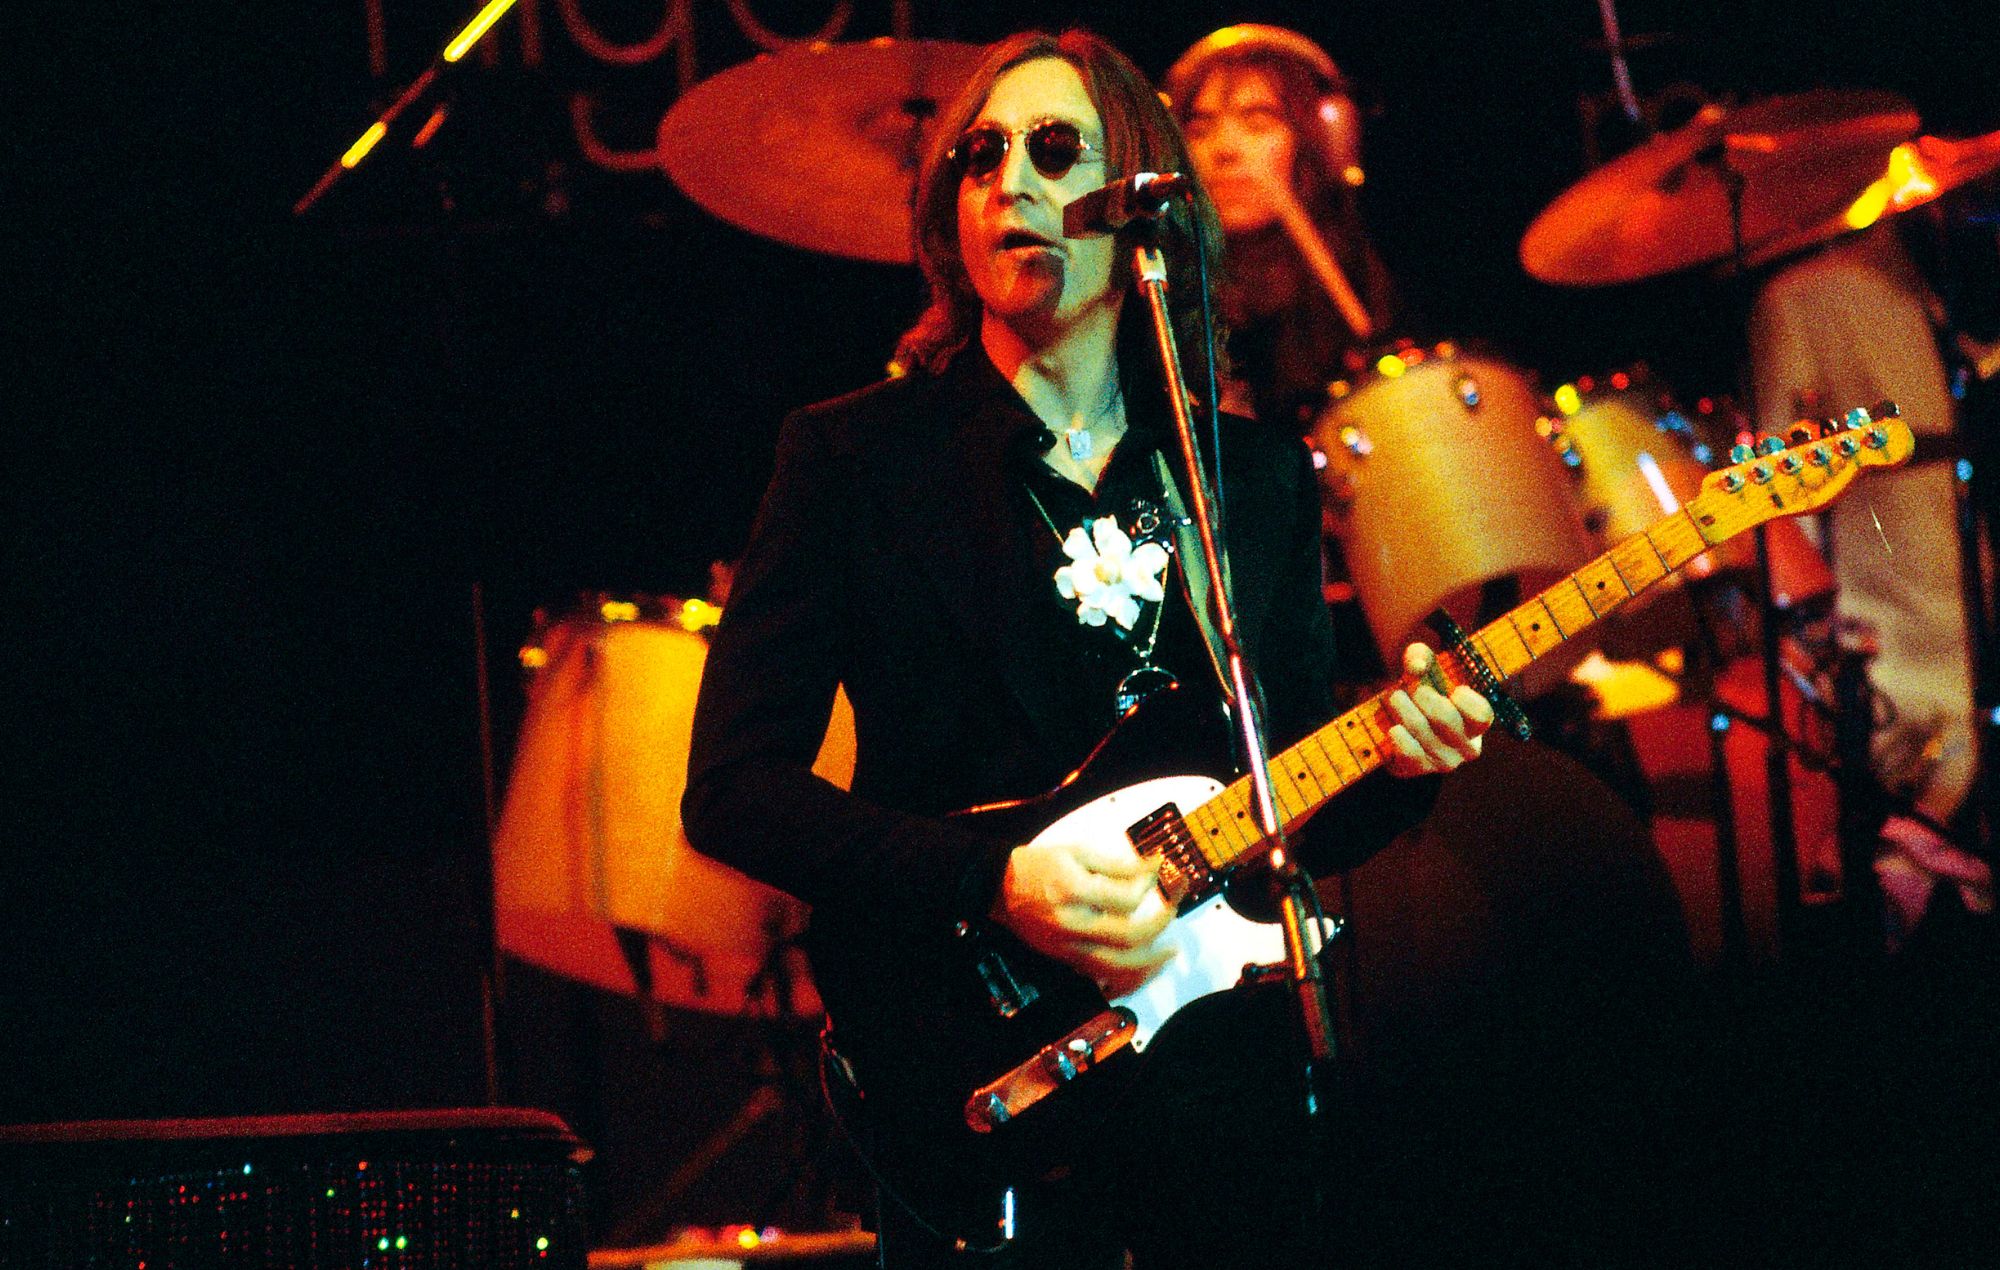 Photo of John Lennon performing live onstage during his last live appearance.